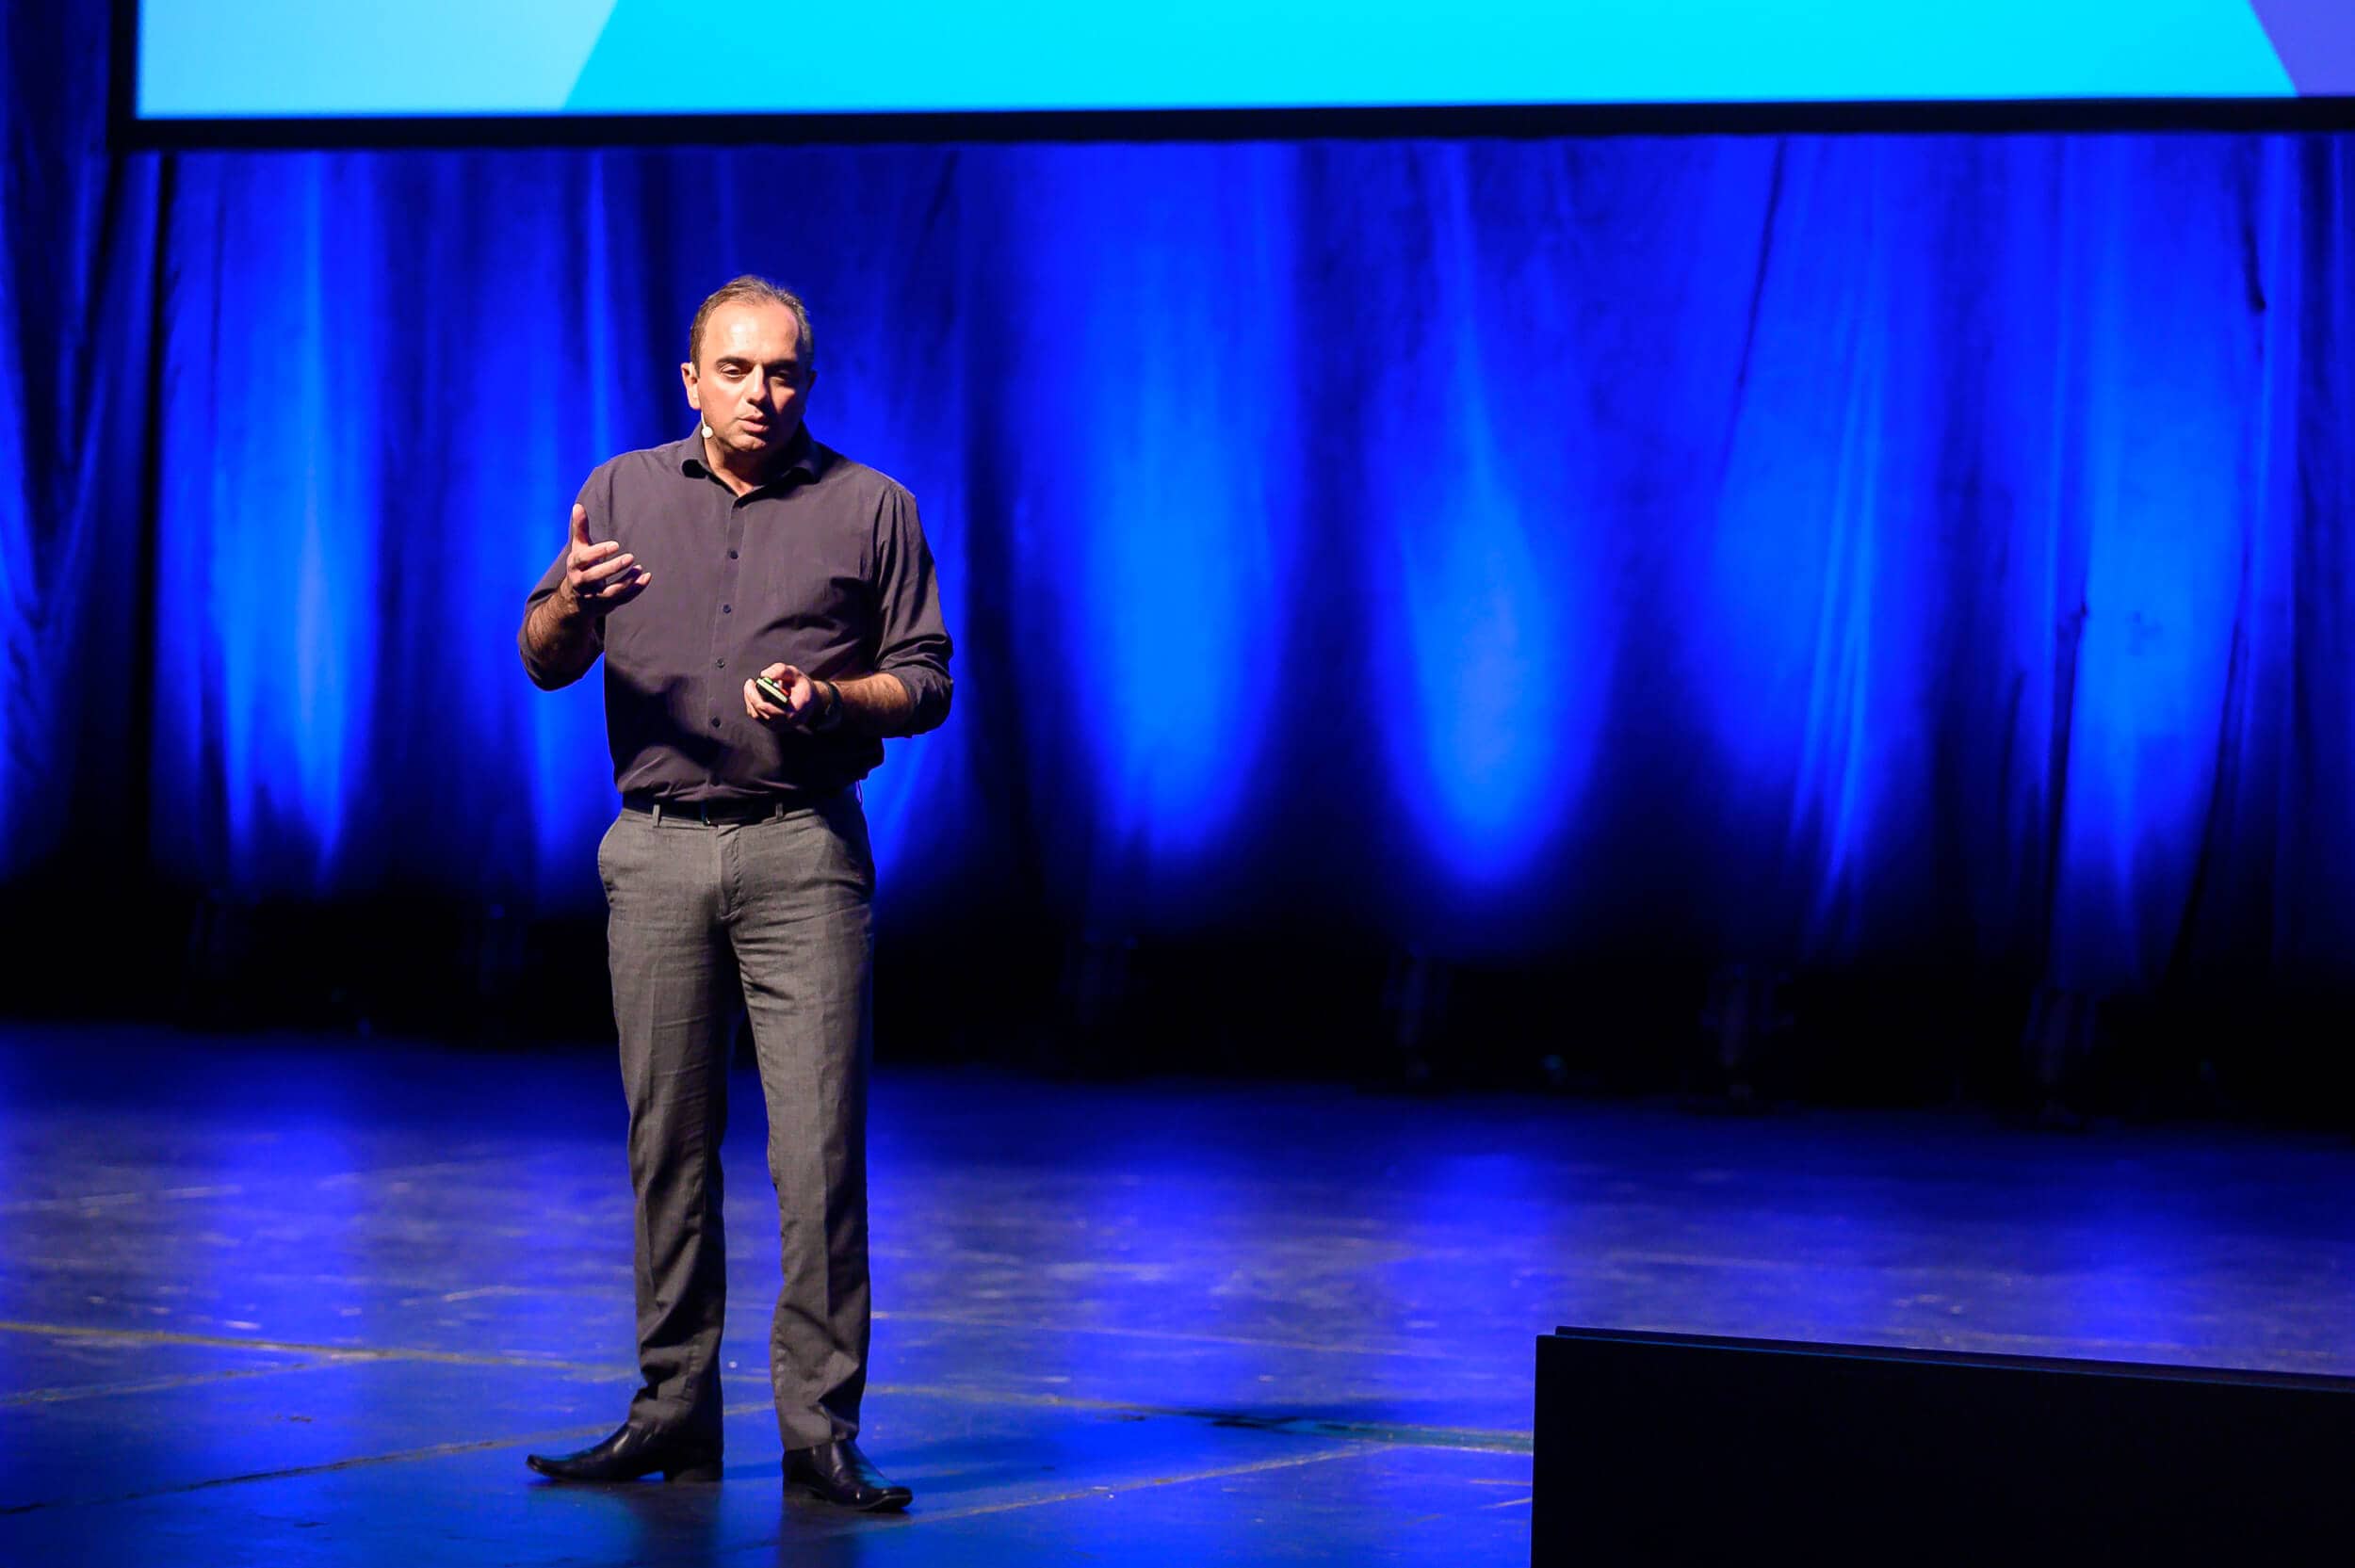 ESPC19 Keynote: Winning with Azure with Tejas Dixit